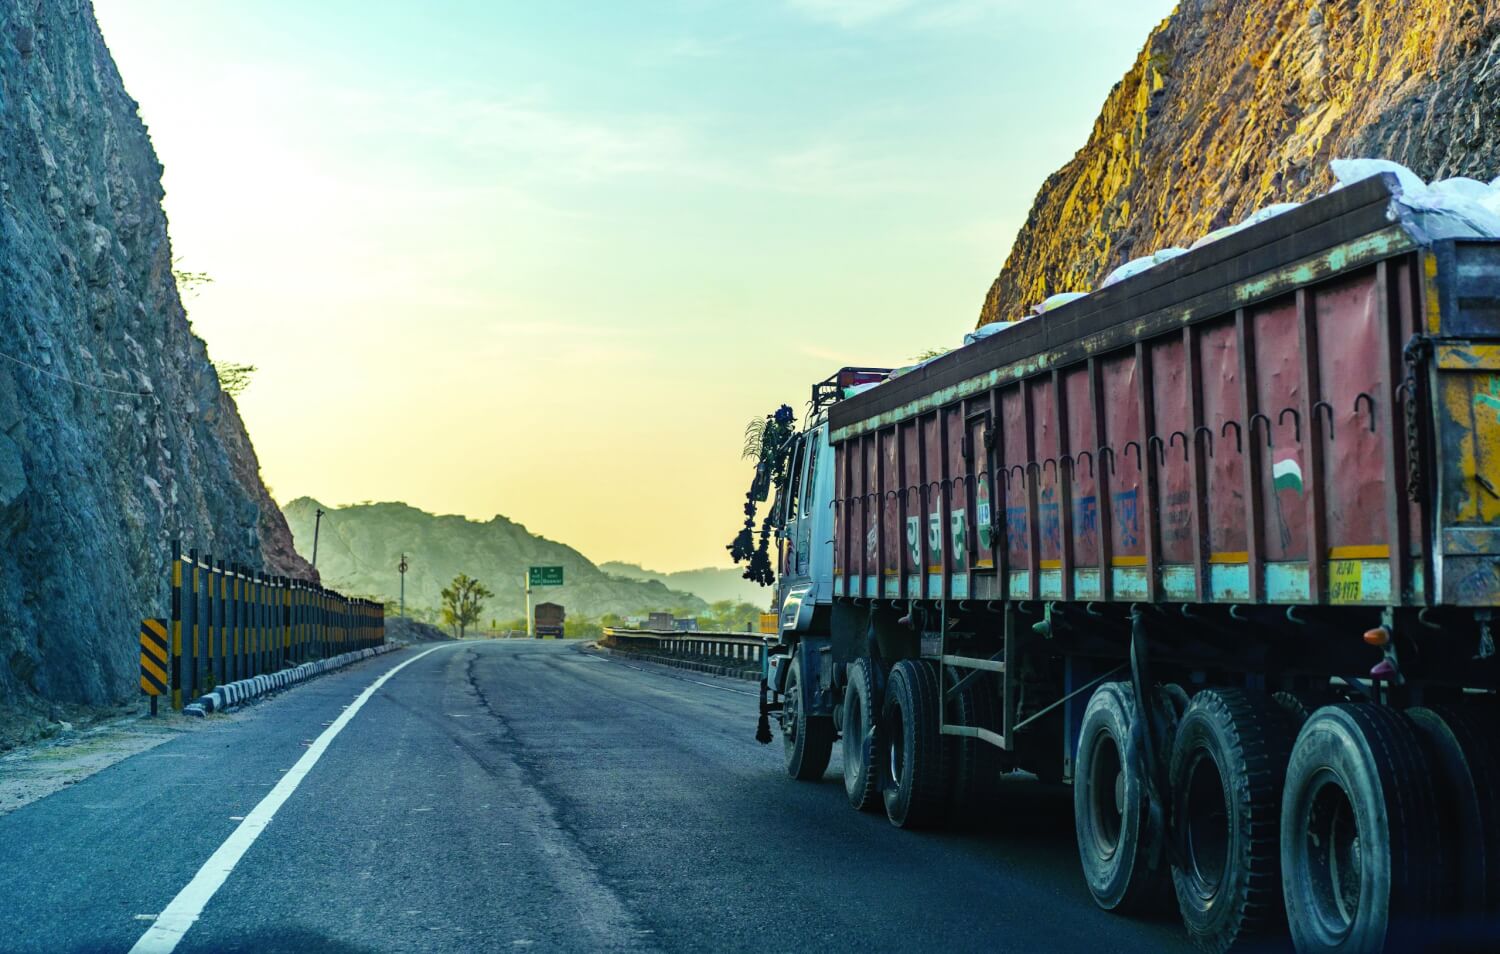 Lorries commonly get in the outside lane on India’s highways and stay there. Photo – Alin Andersen via Unsplash